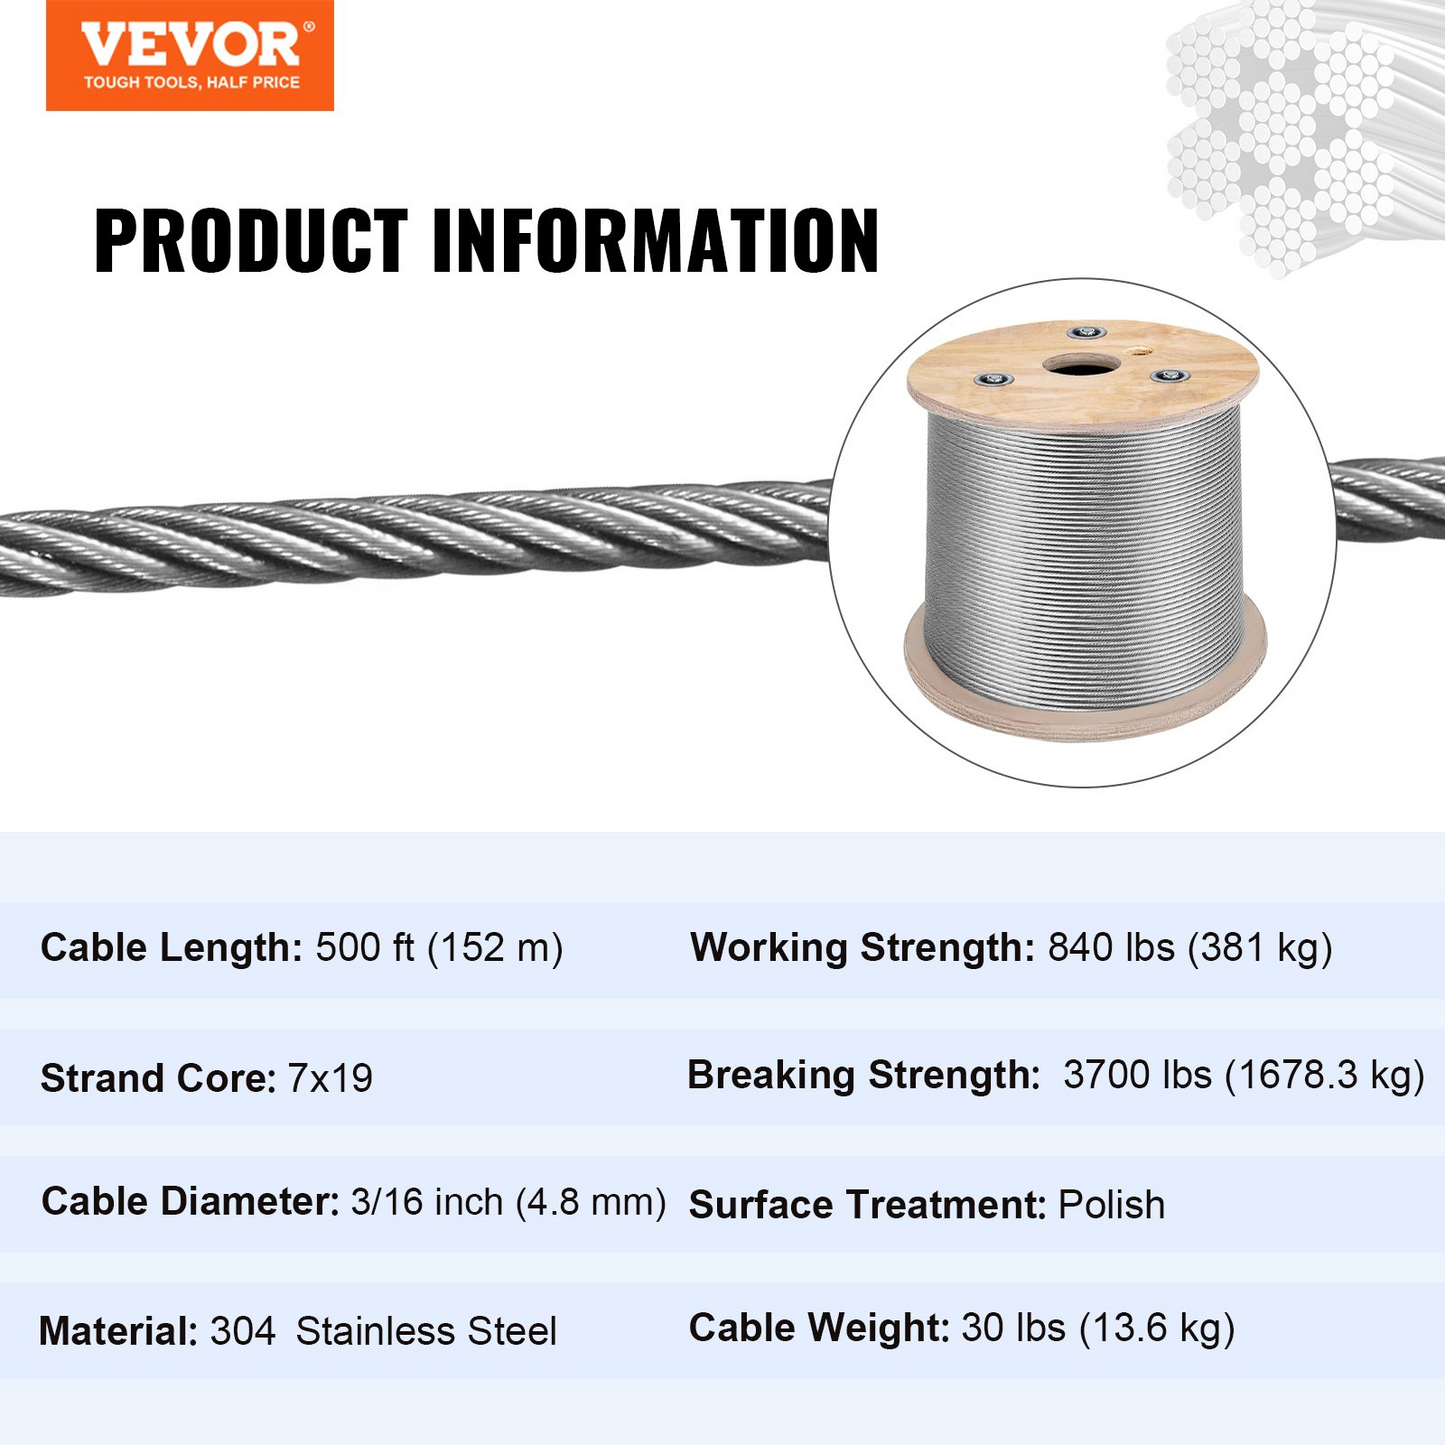 VEVOR 3/16 Inch 7x19 Stainless Steel Aircraft Cable Reel 500FT Stainless Steel Cable T304 Wire Rope Winch Cable Replacement (T304), Goodies N Stuff